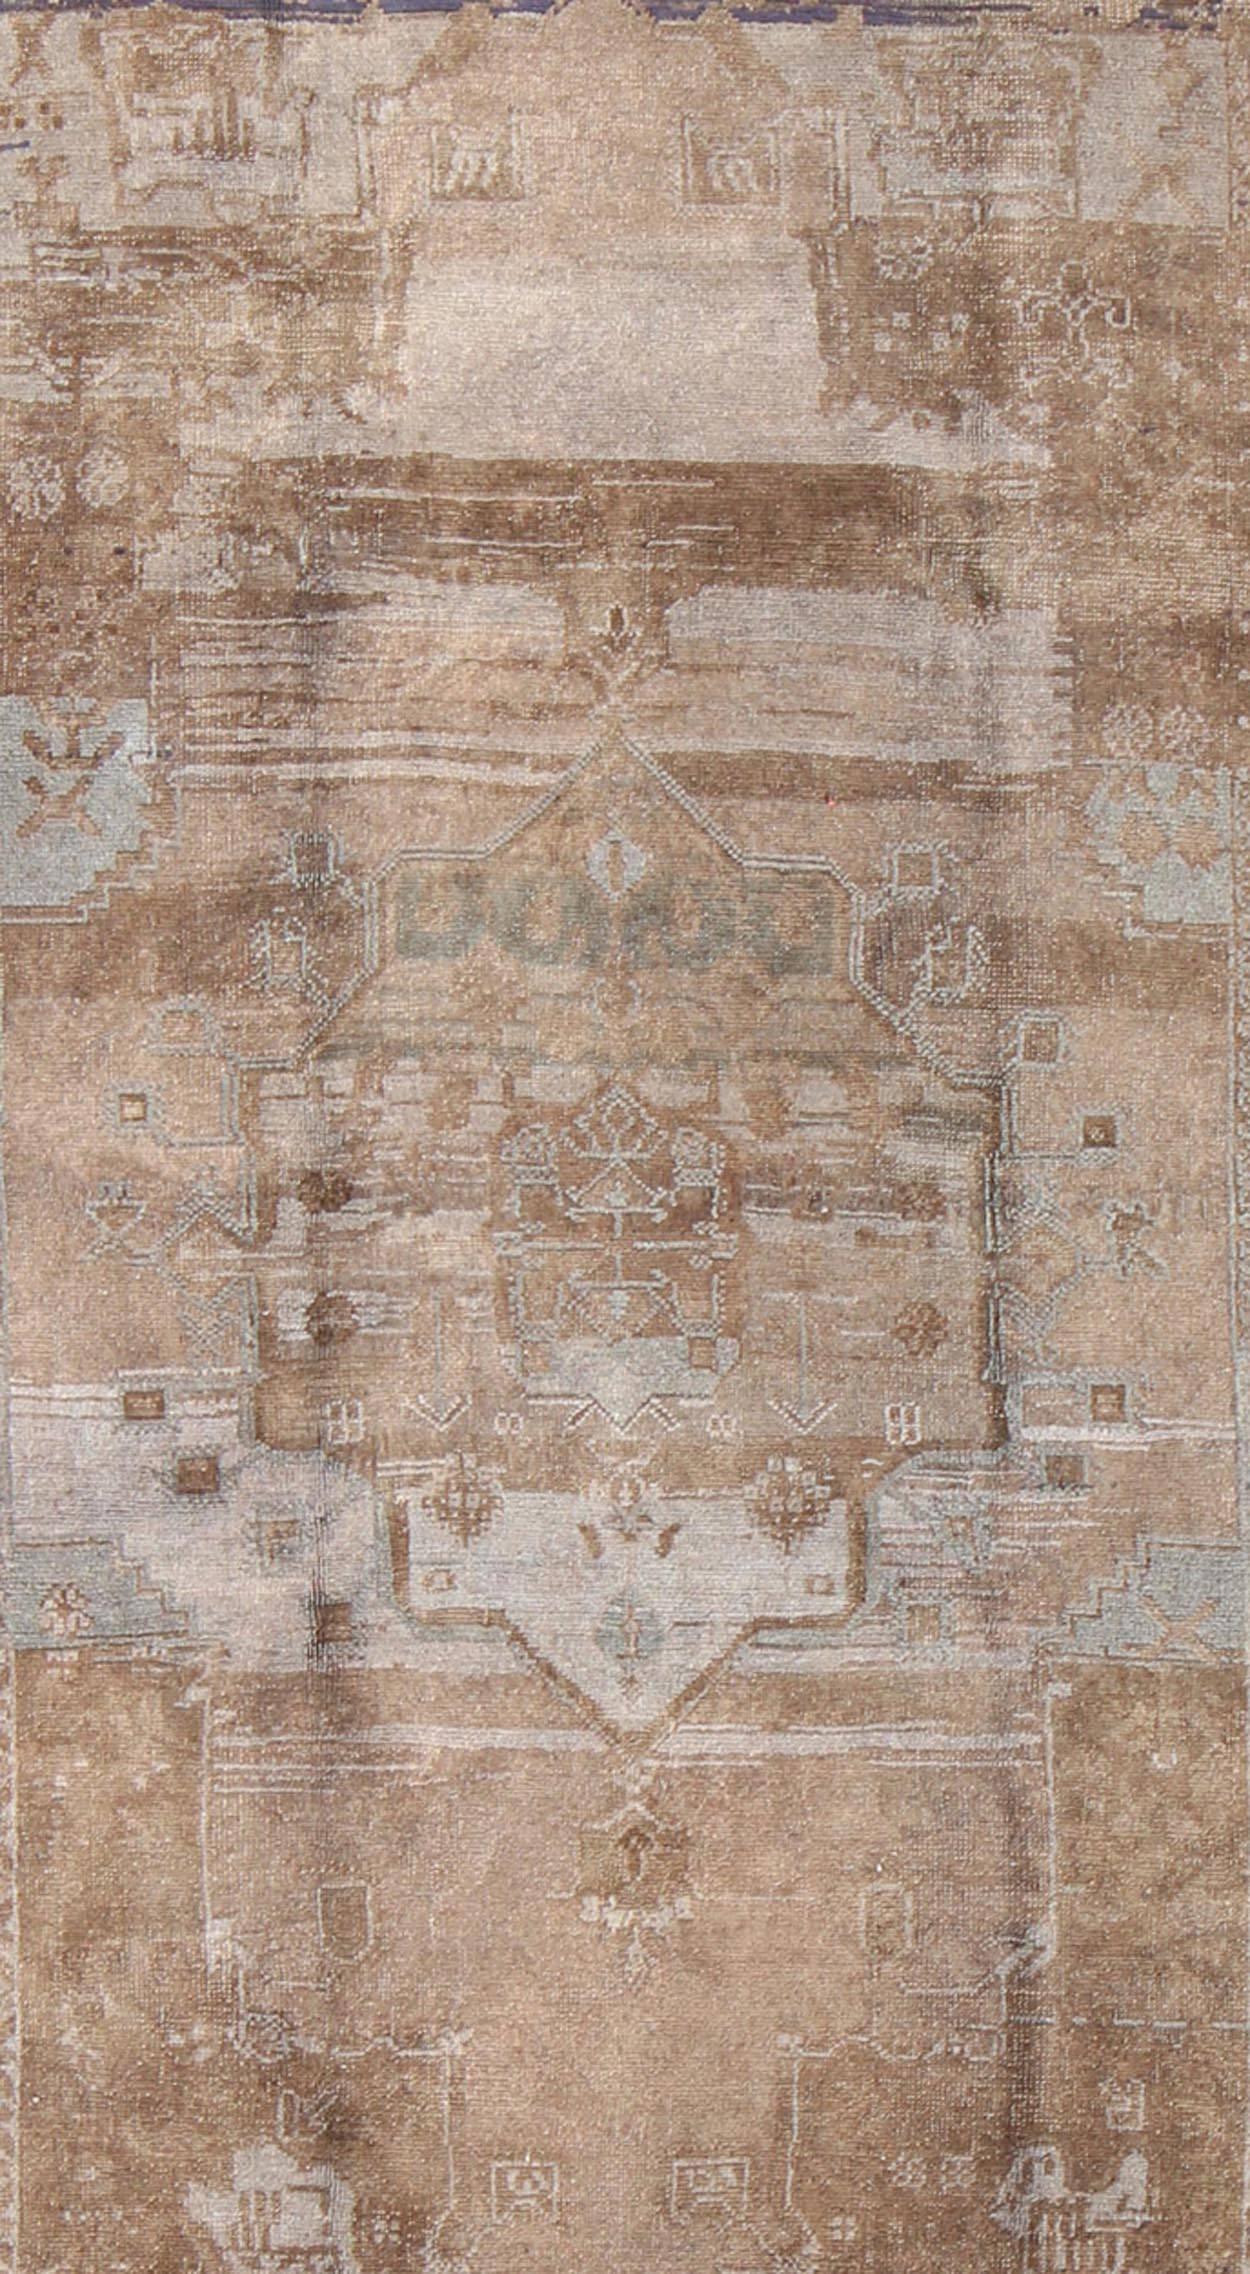 Turkish Faded Brown and Gray Vintage Oushak Rug from Turkey with Medallion Design For Sale